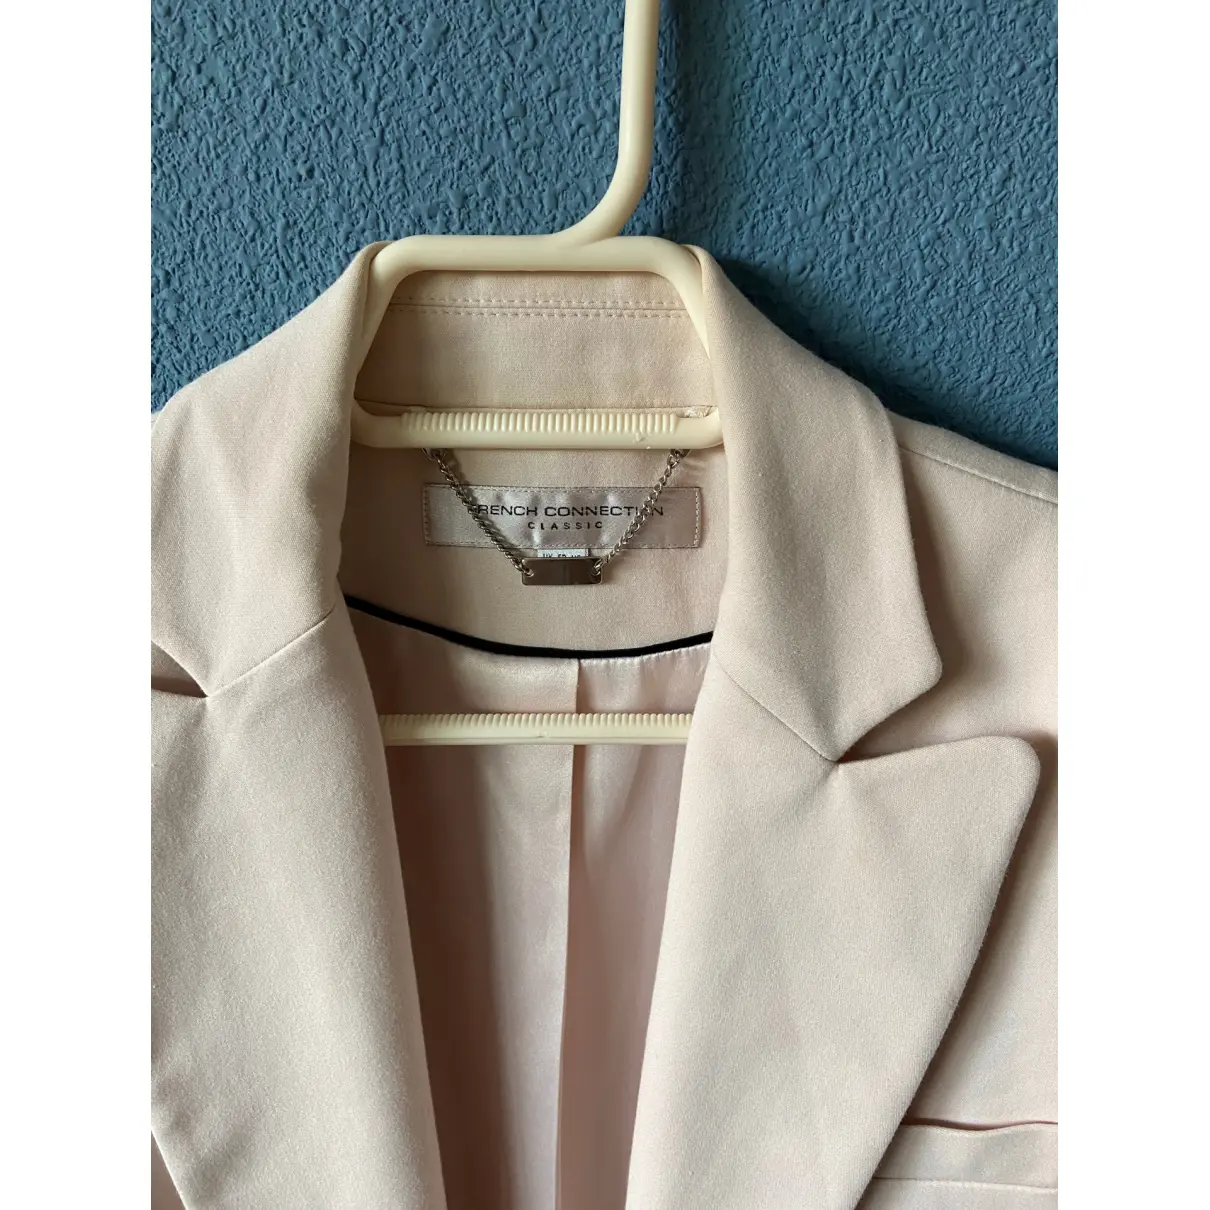 Luxury French Connection Jackets Women